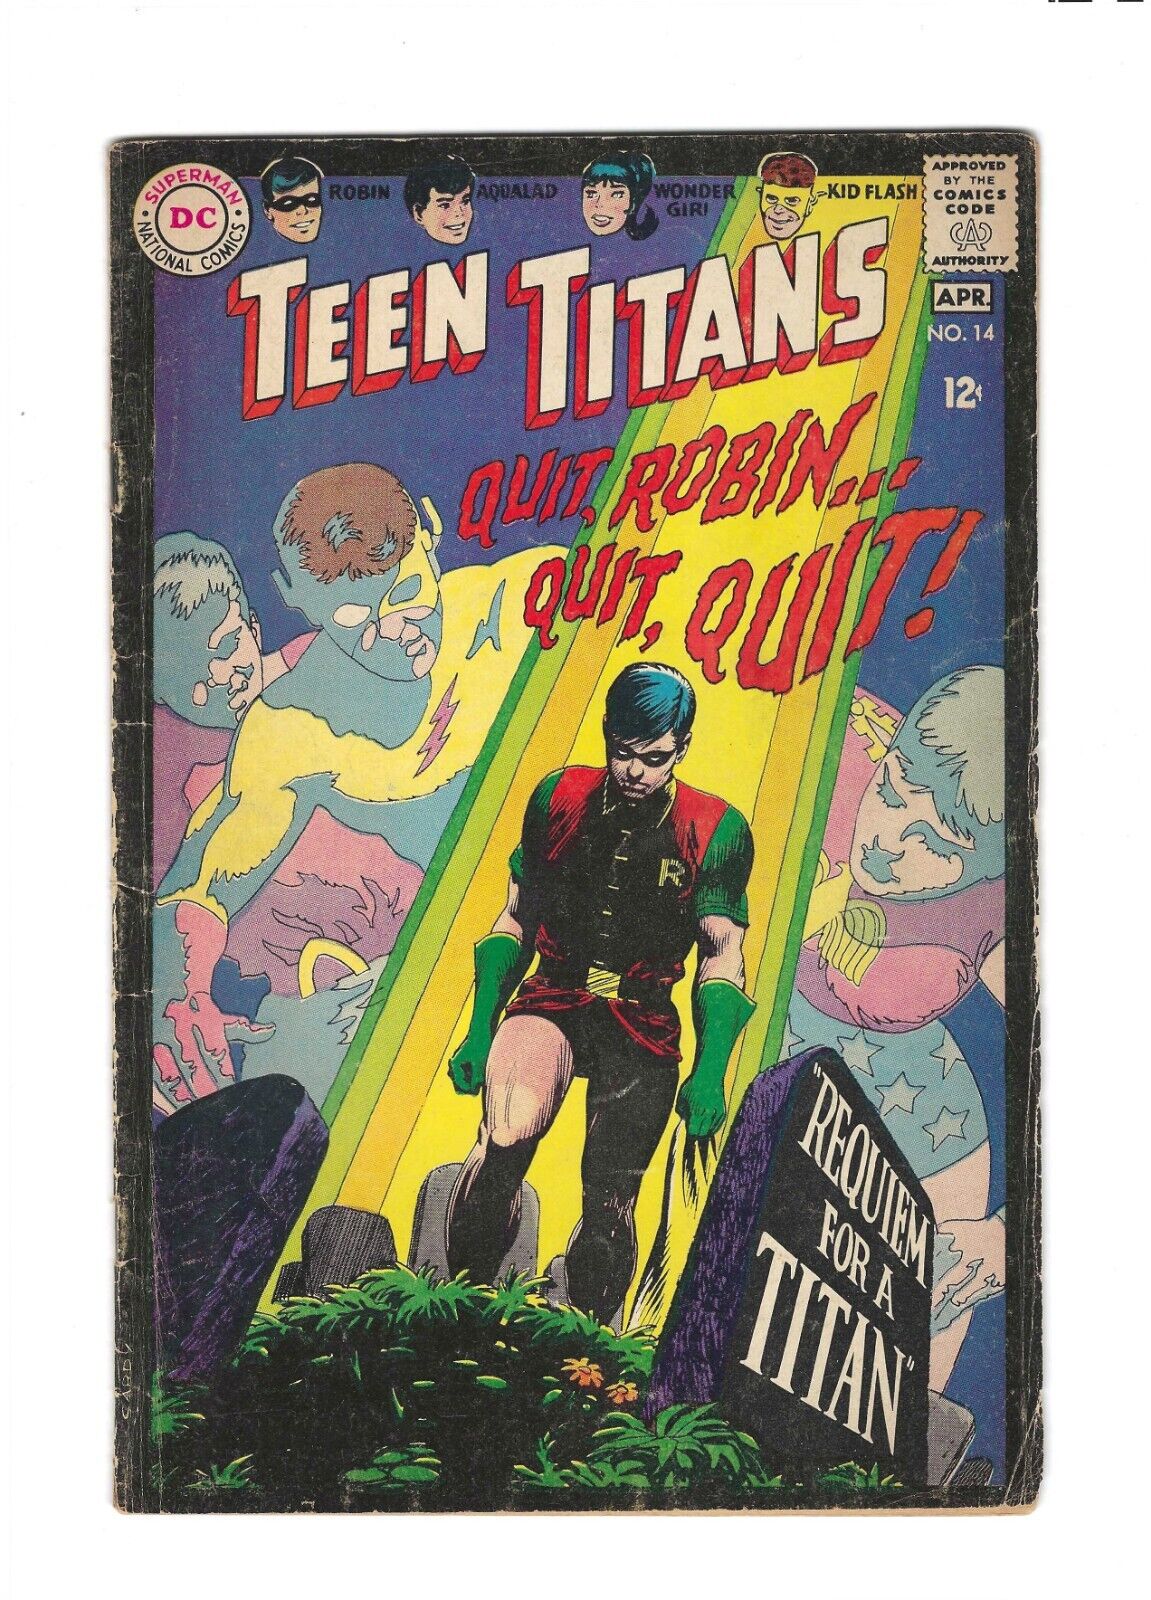 Teen Titans #14: Dry Cleaned: Pressed: Scanned: Bagged & Boarded VG/FN 5.0